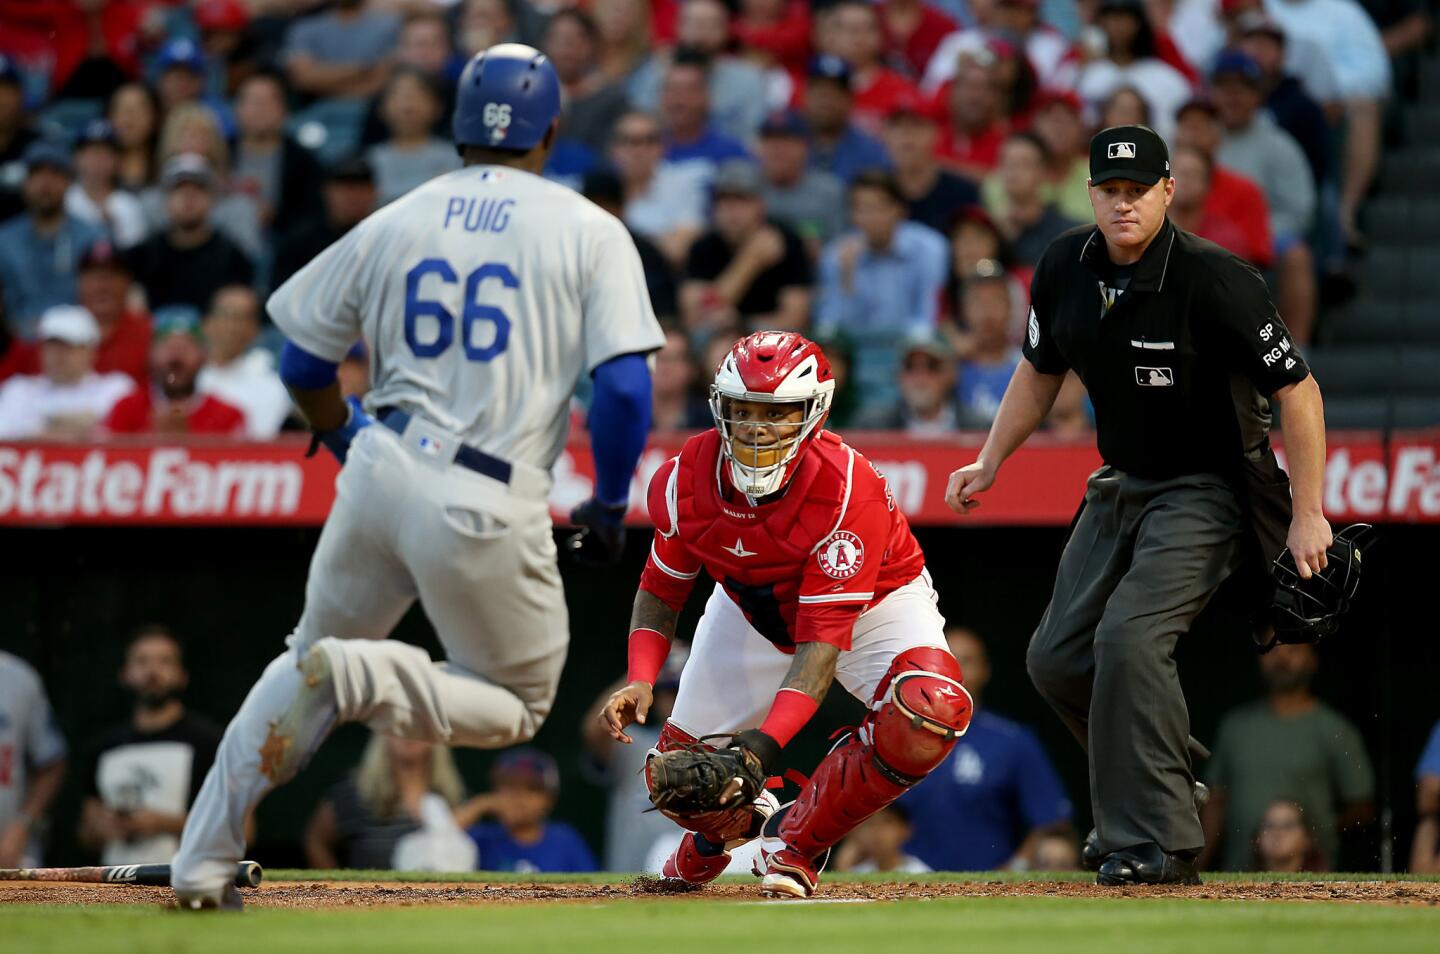 Angels catcher Martin Maldonado prepares to put a tag on Dodgers right fielder Yasiel Puig in the third inning.